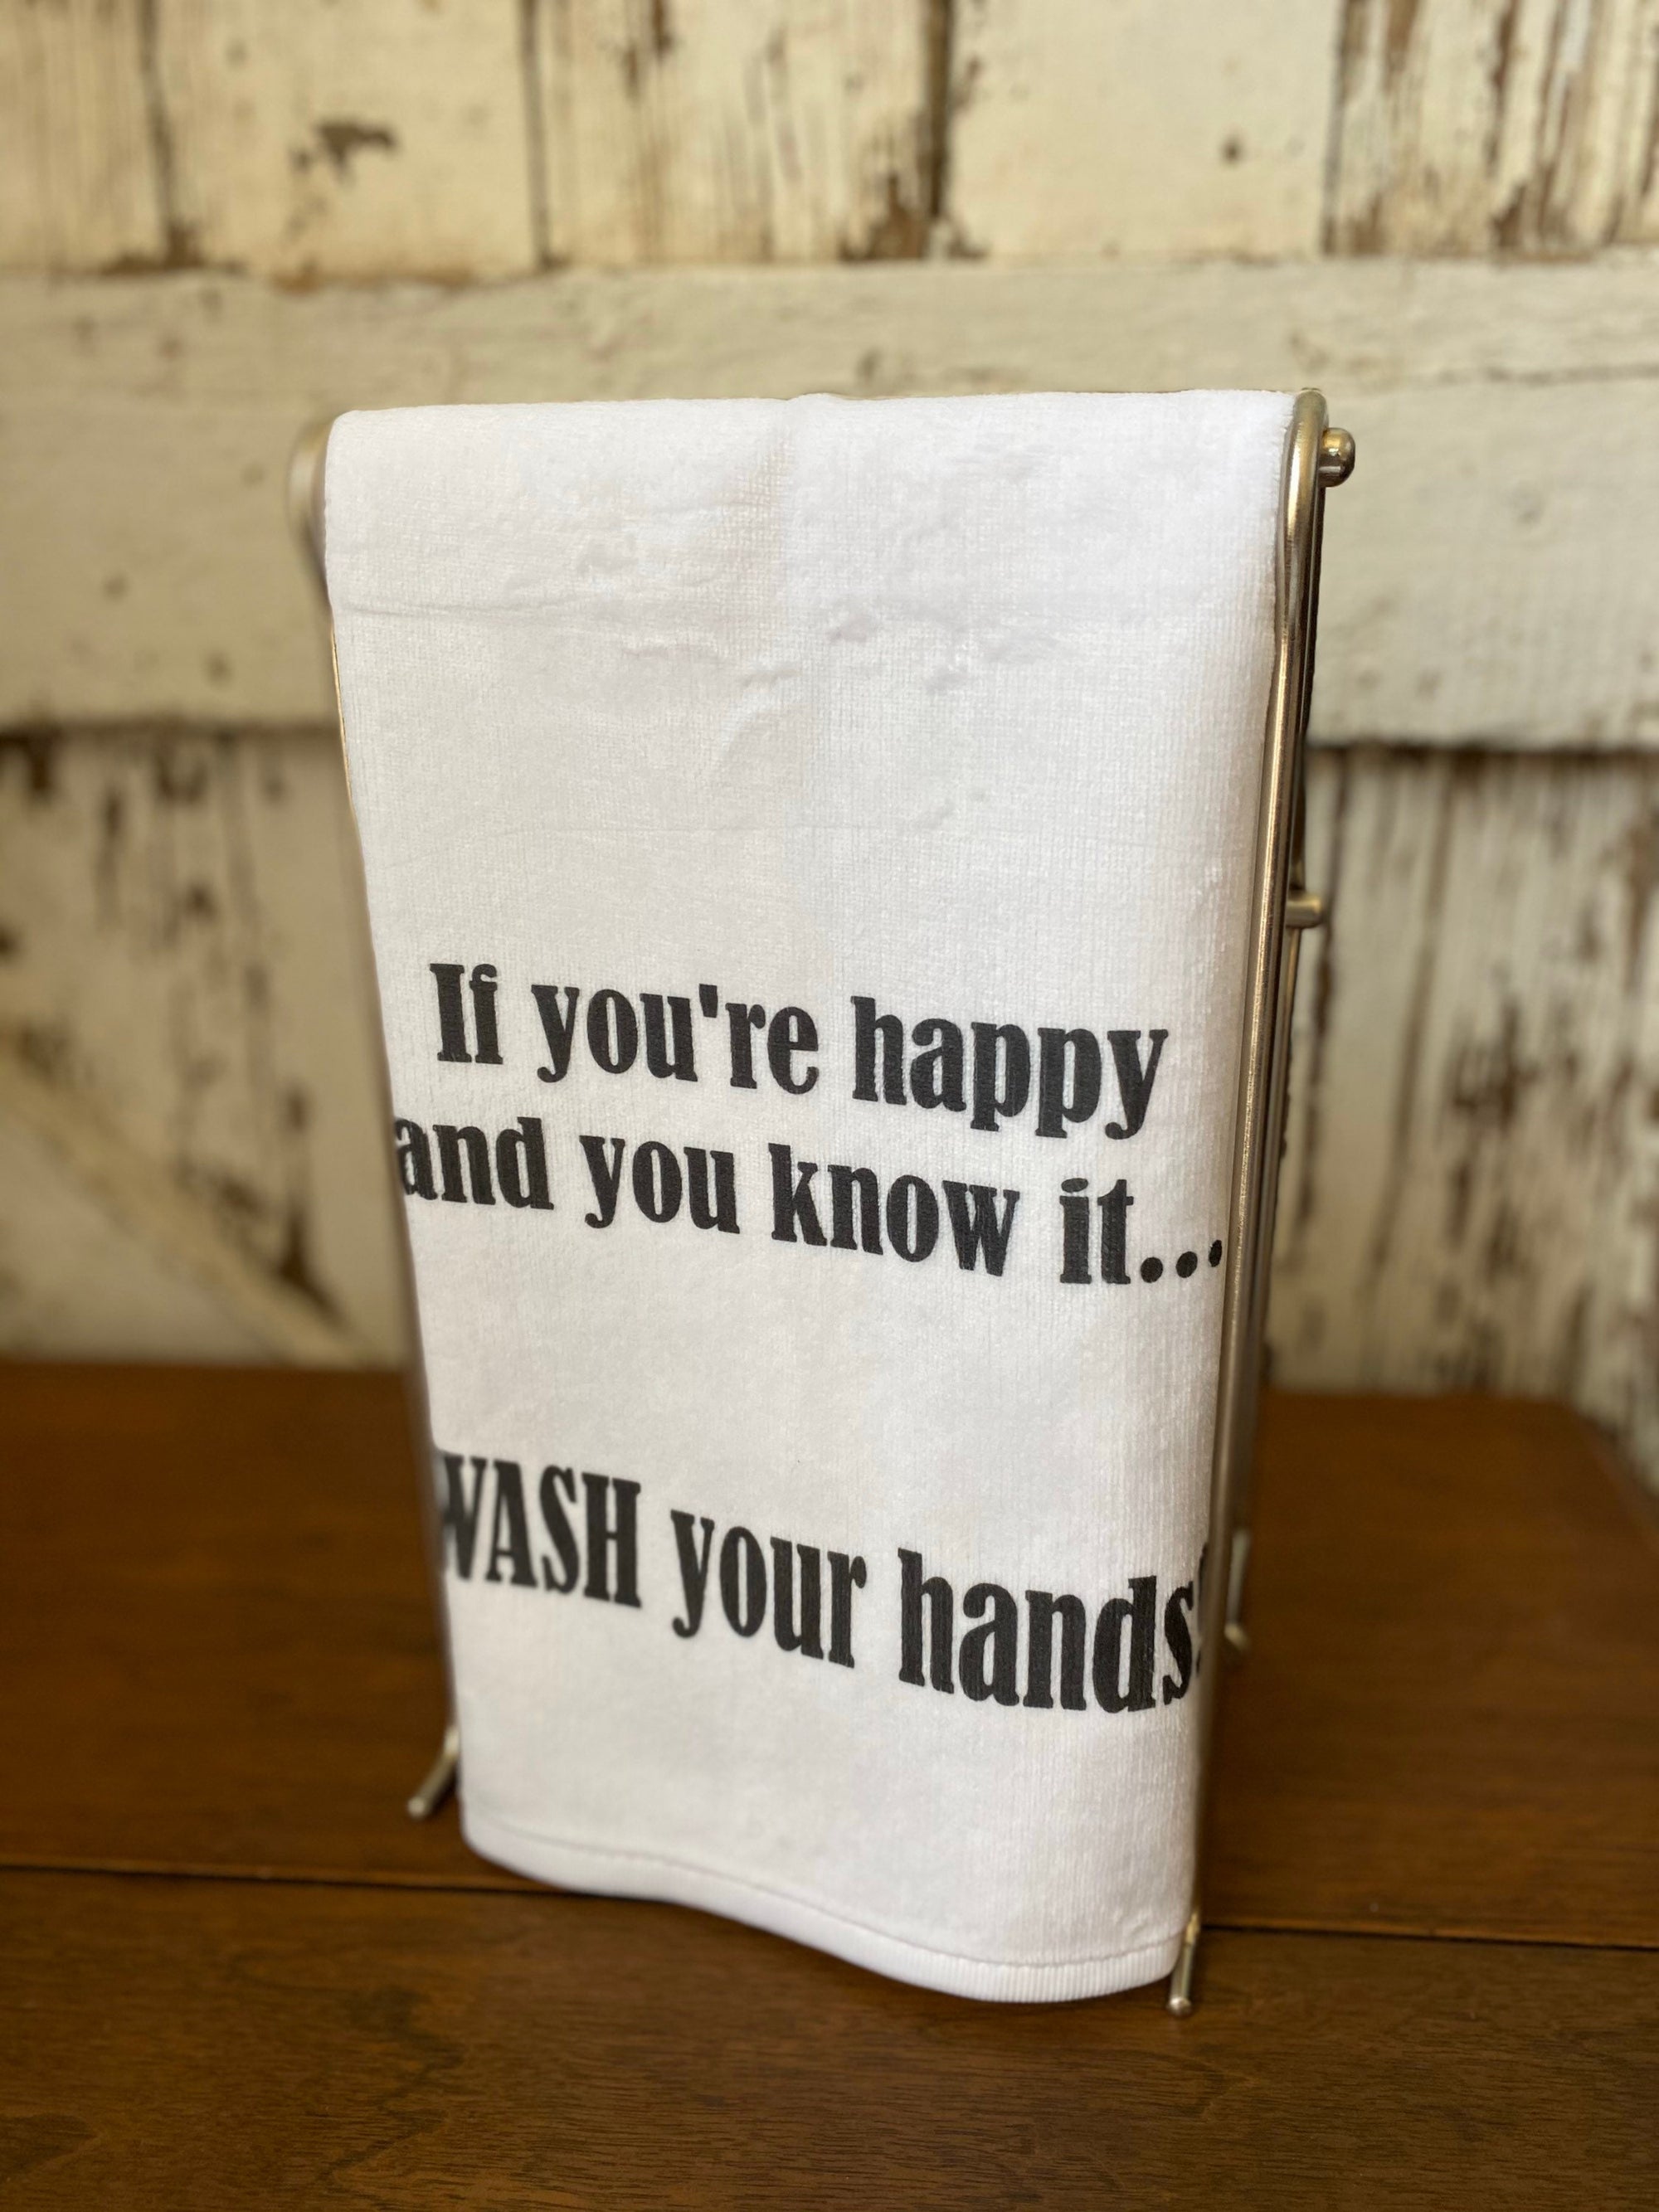 If You’re Happy And You Know It Wash Your Hands- Funny Hand Towel- Bathroom Decor